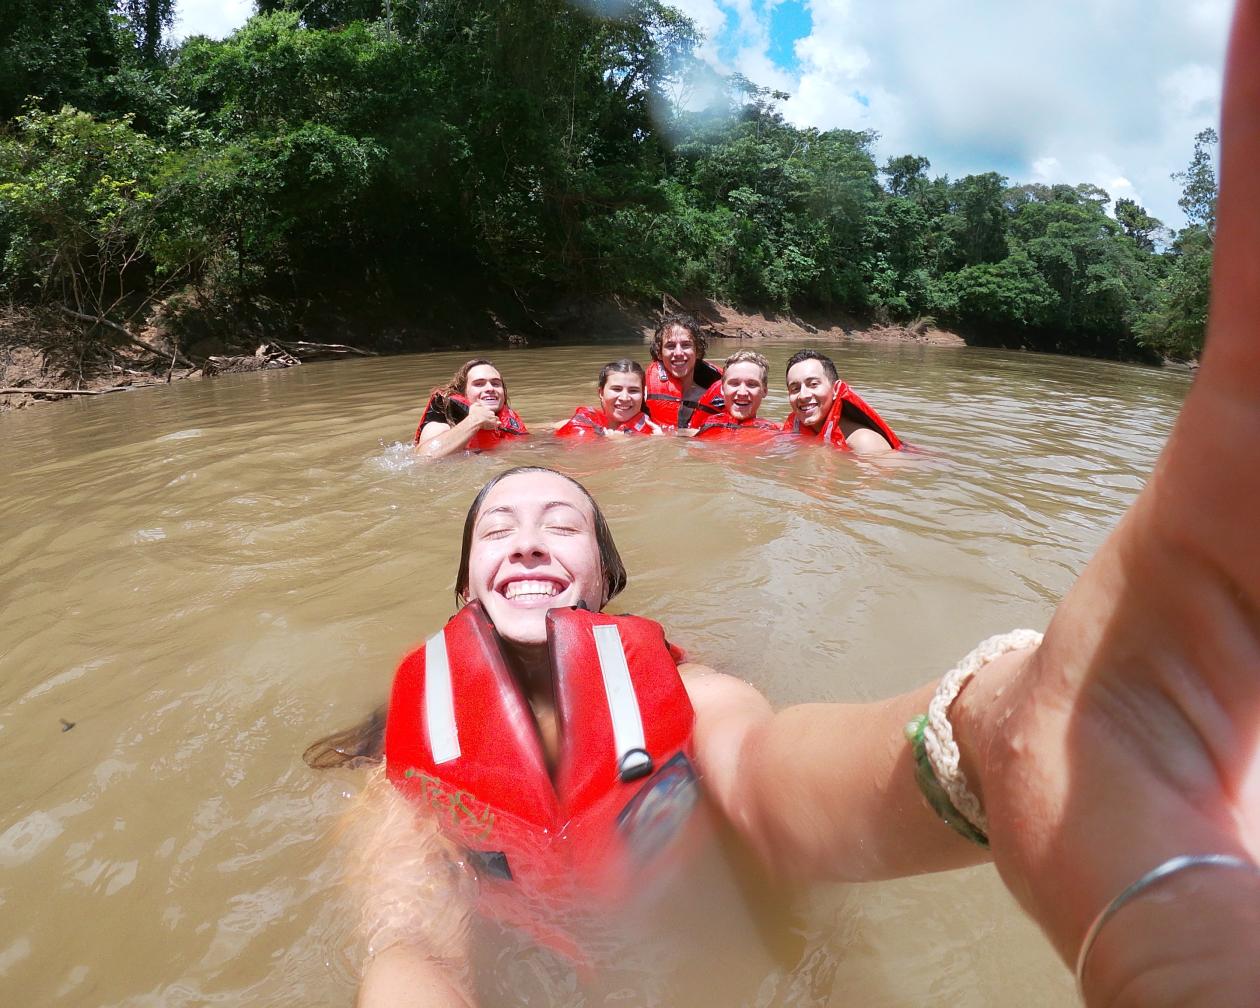 One student taking a selfie while swimming in the Amazon Rainforest with a group of other students in the distance behind her